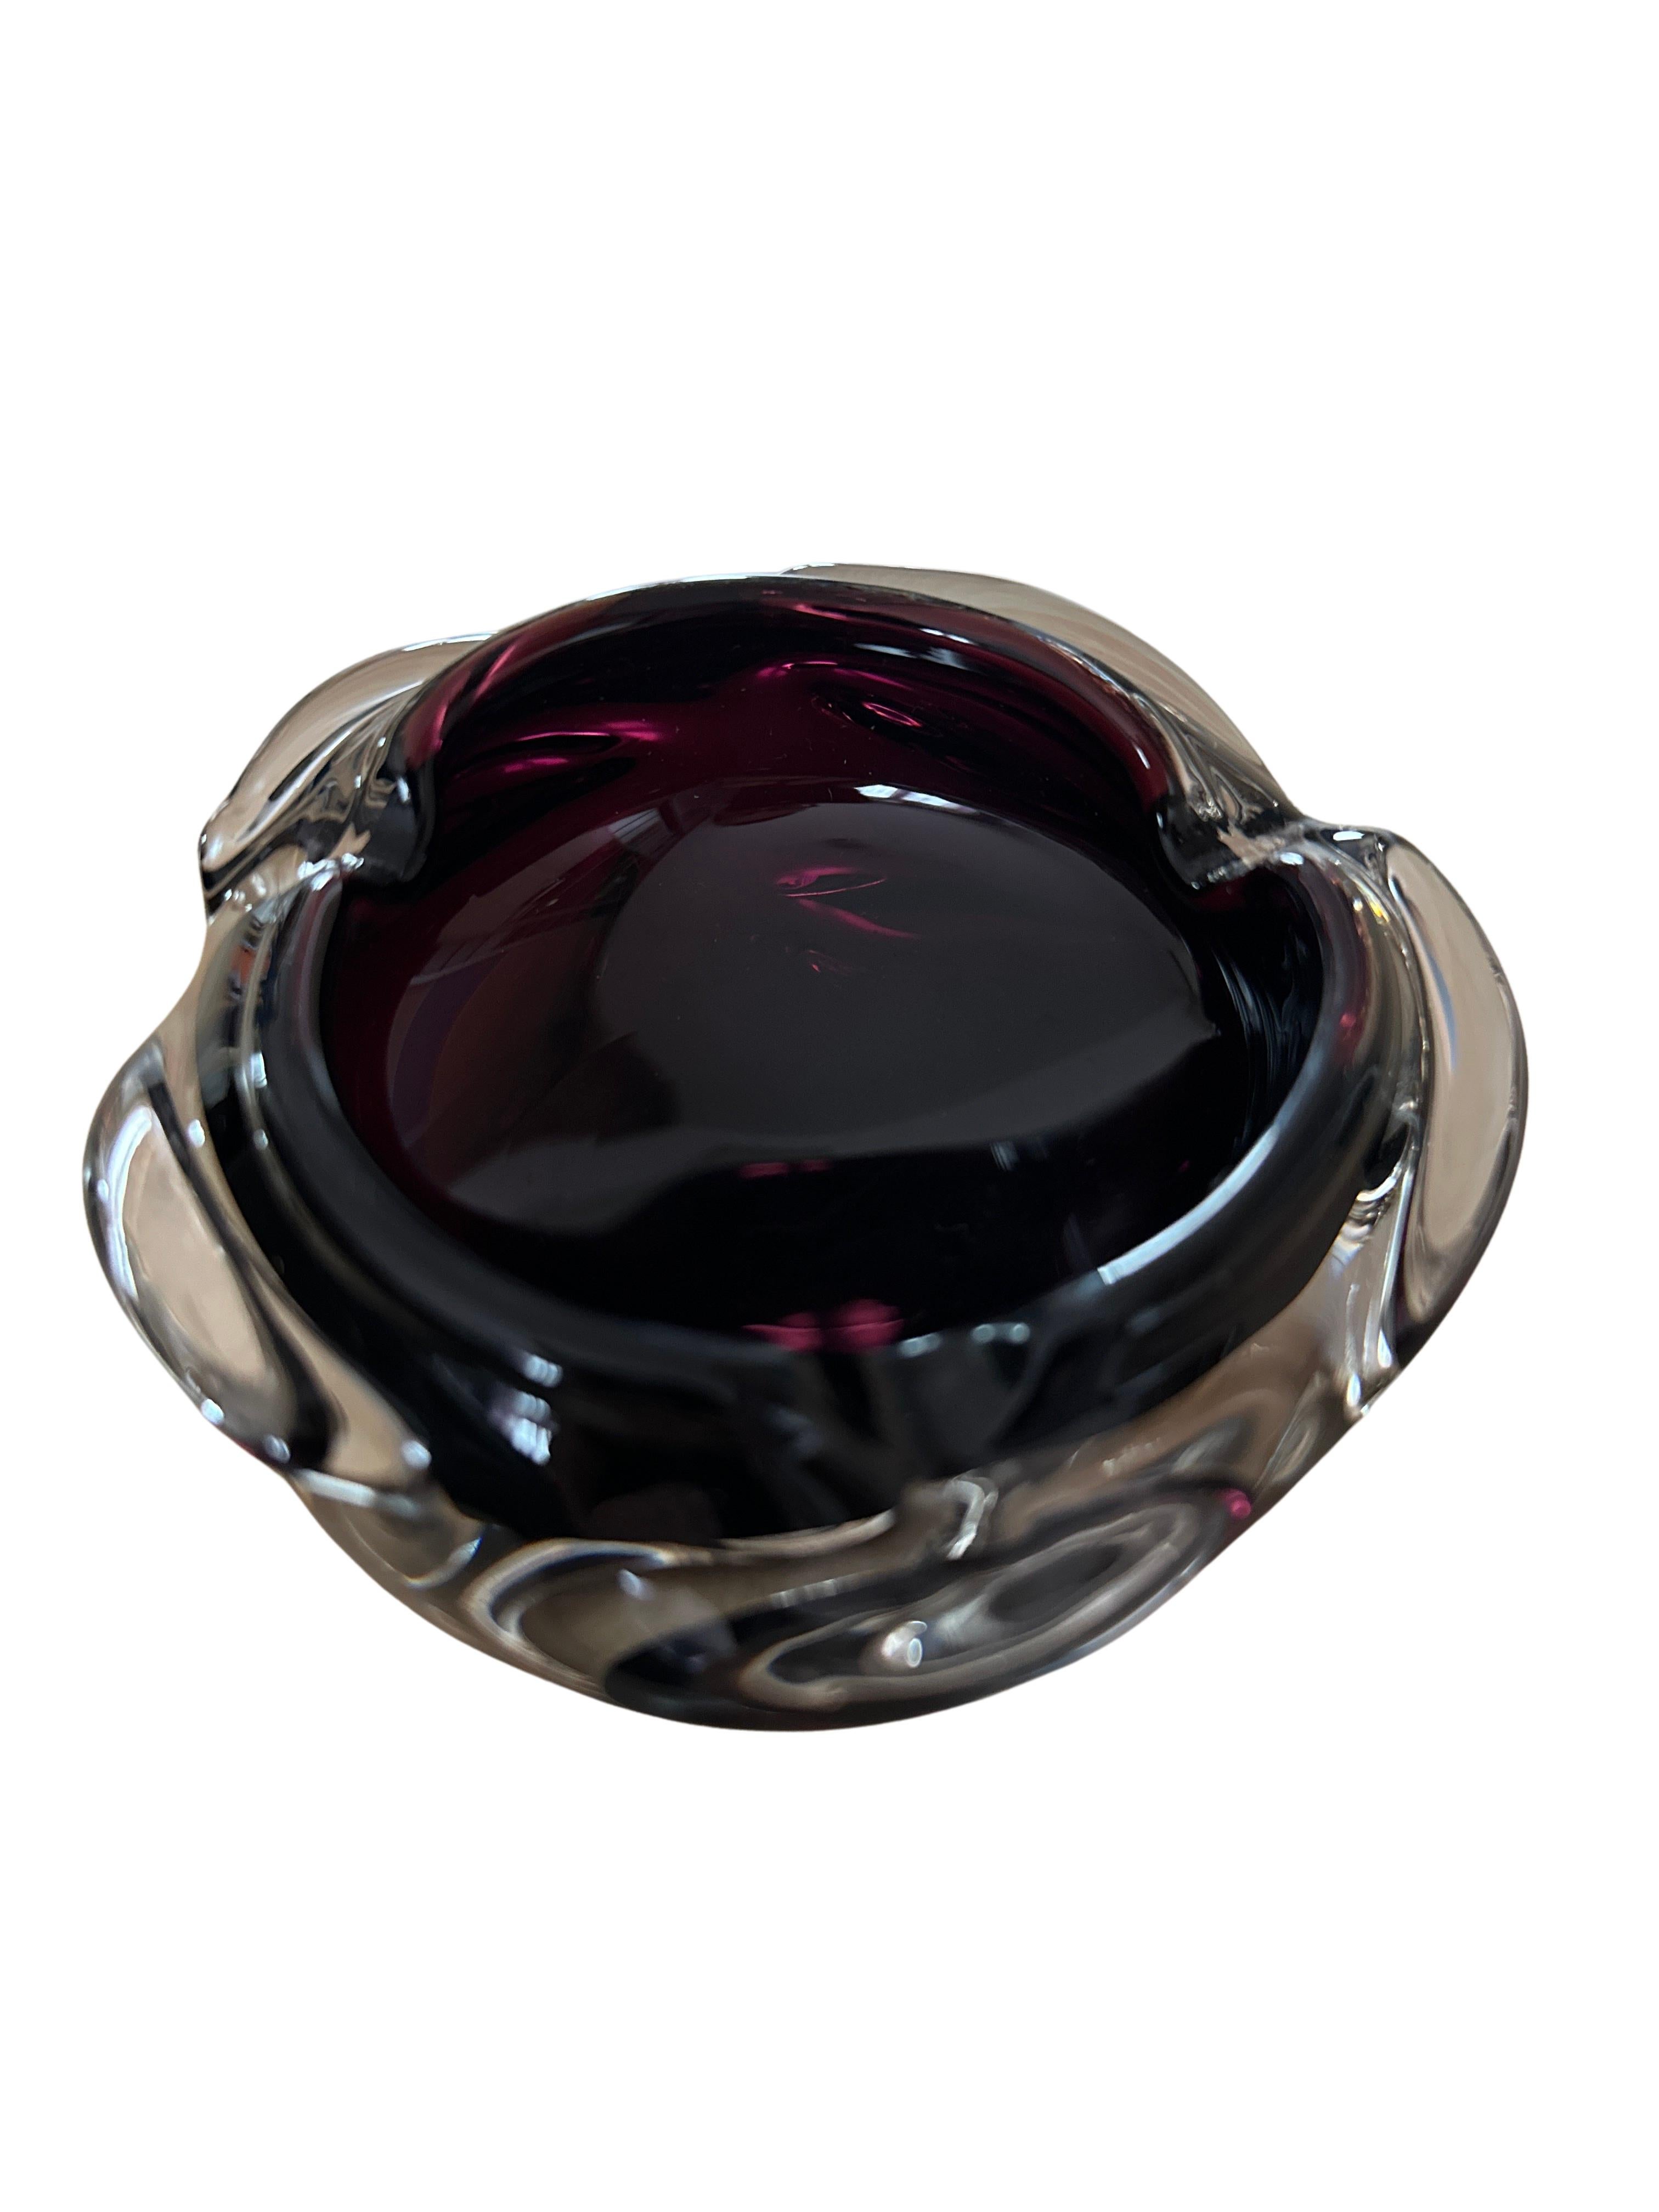 Hand-Crafted Midcentury Bowl in Dark Burgundy Color, 1960s For Sale